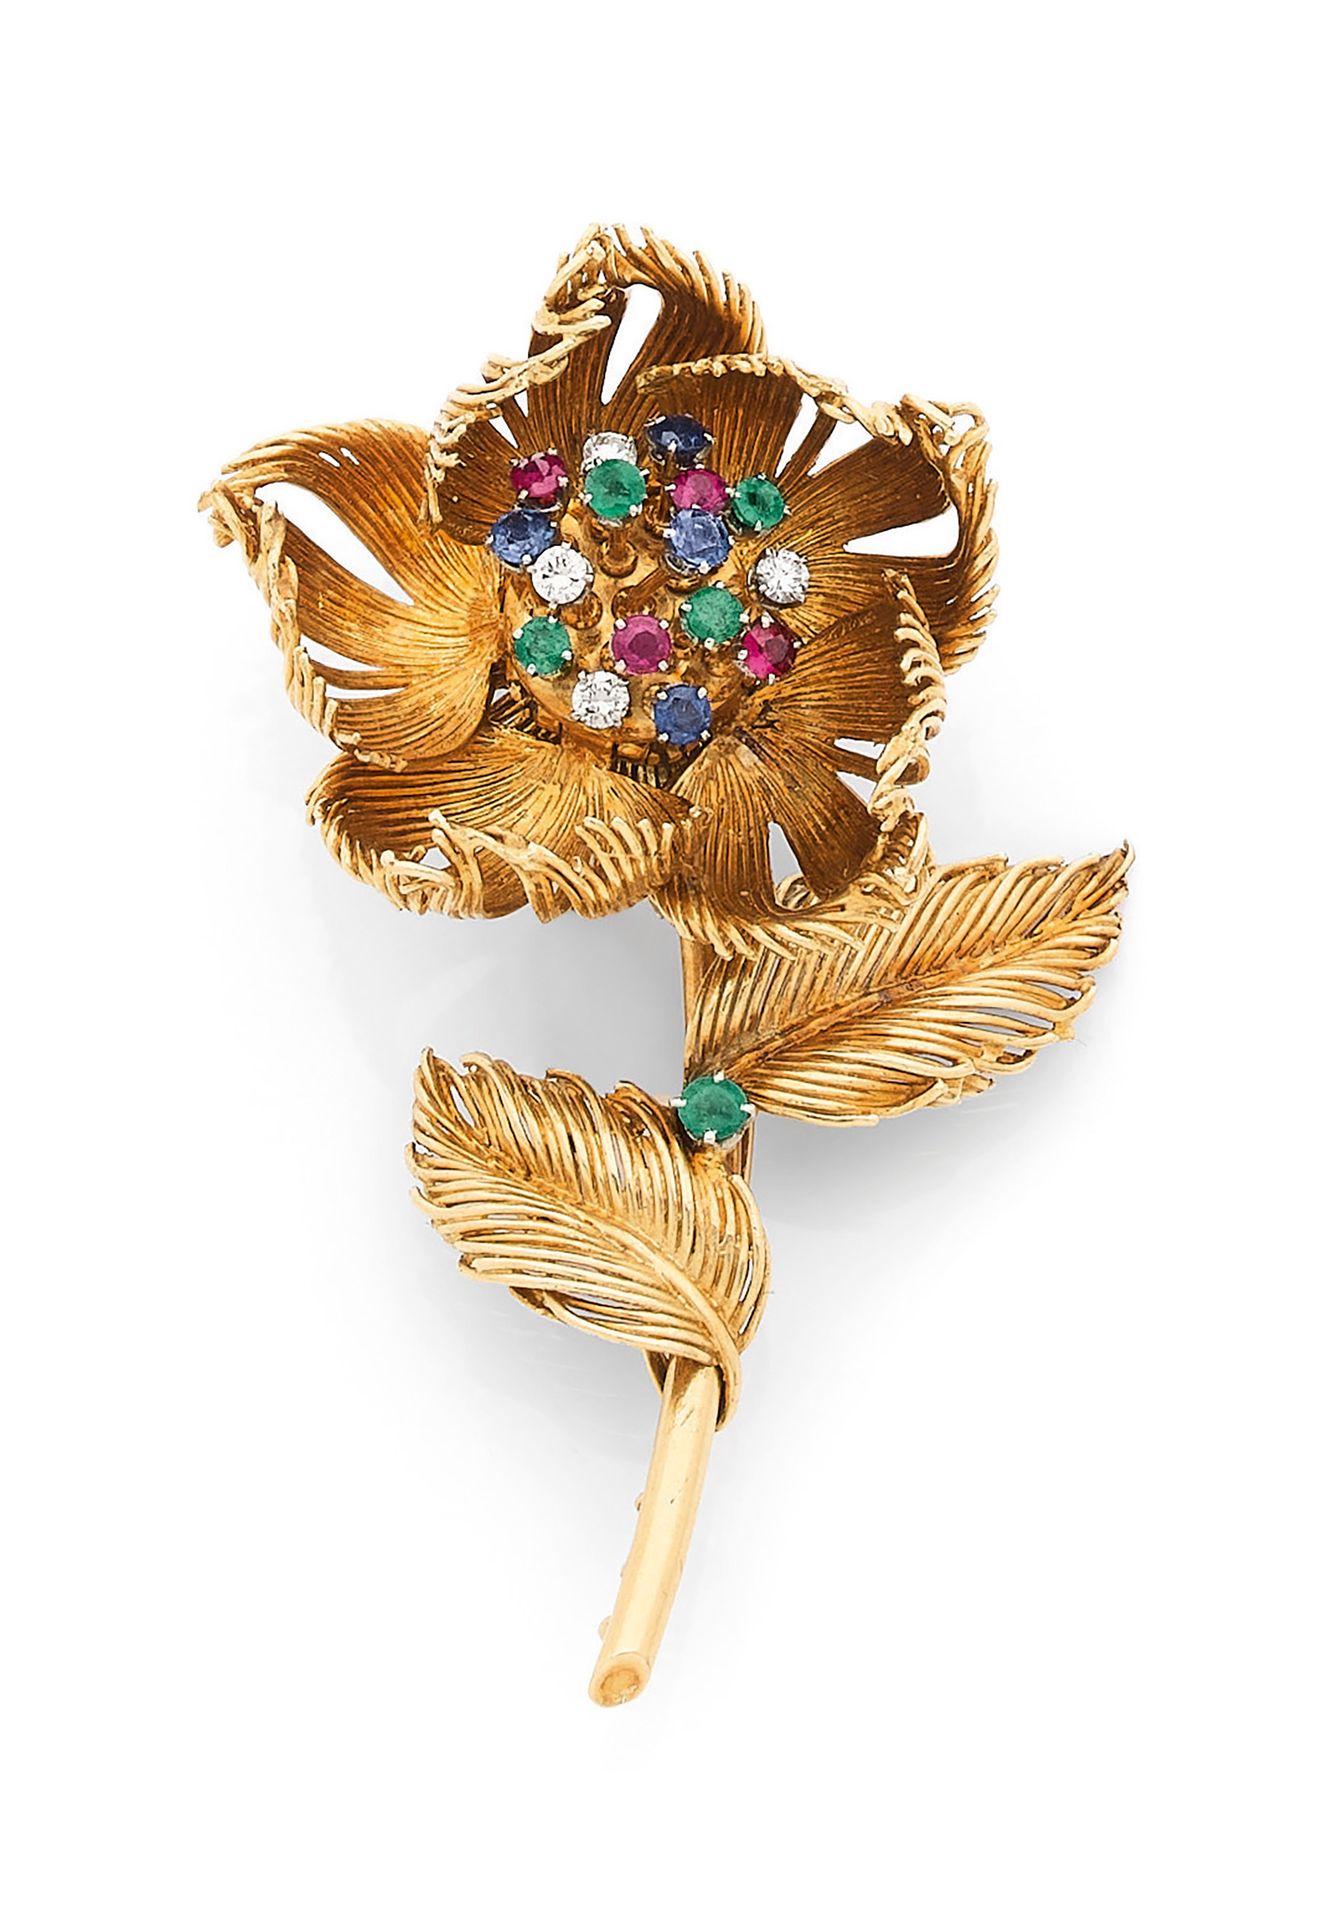 CARTIER CARTIER
18K (750) gold brooch-clip representing a flower, the mobile pis&hellip;